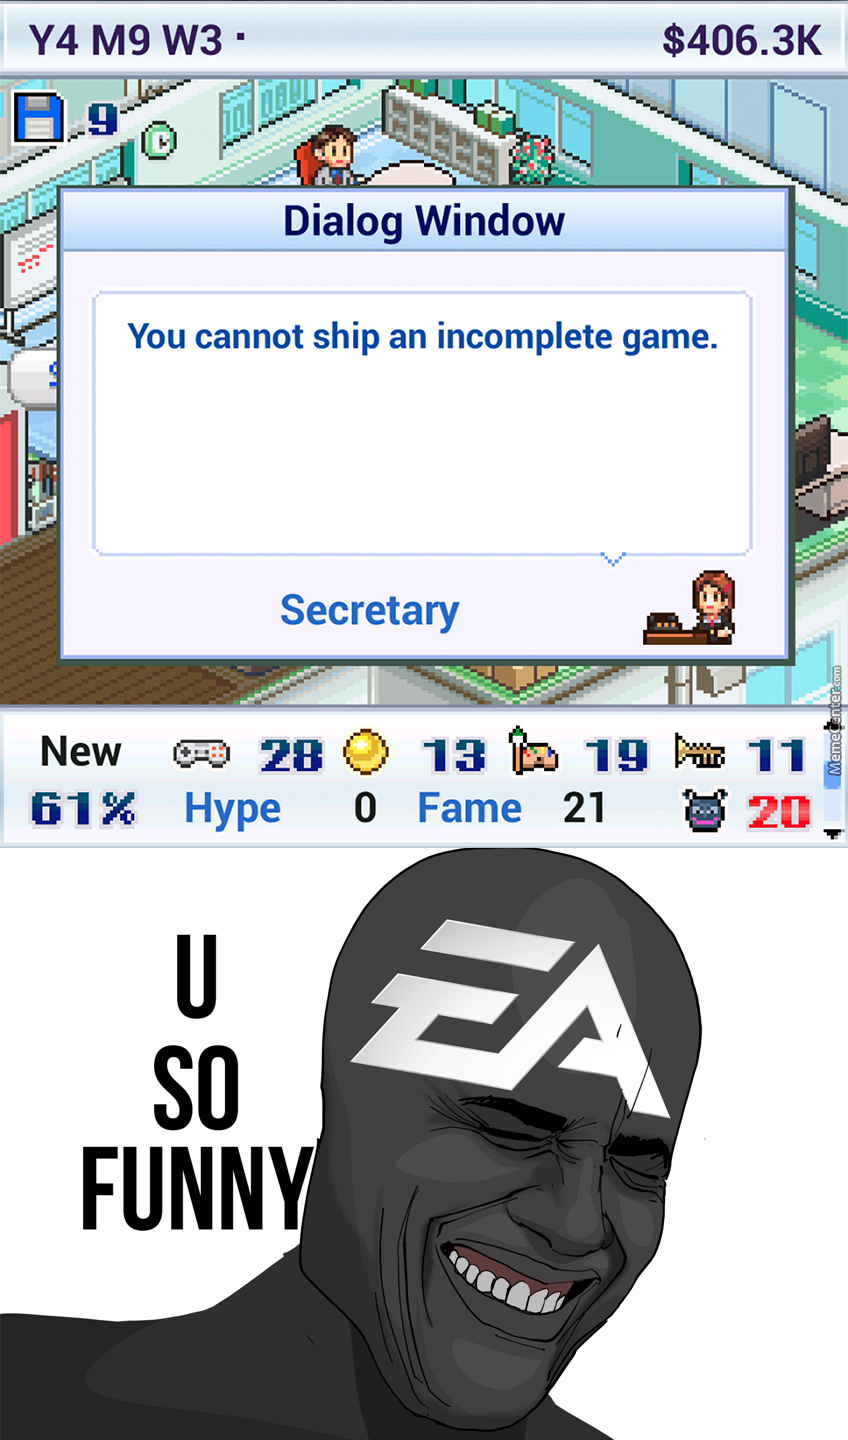 funny gaming memes - ea funny - $ Y4 M9 W3 B.F Ho Dialog Window You cannot ship an incomplete game. Secretary New 28 0 13 1 19 61% Hype 0 Fame 21 11 20 Ea Funny